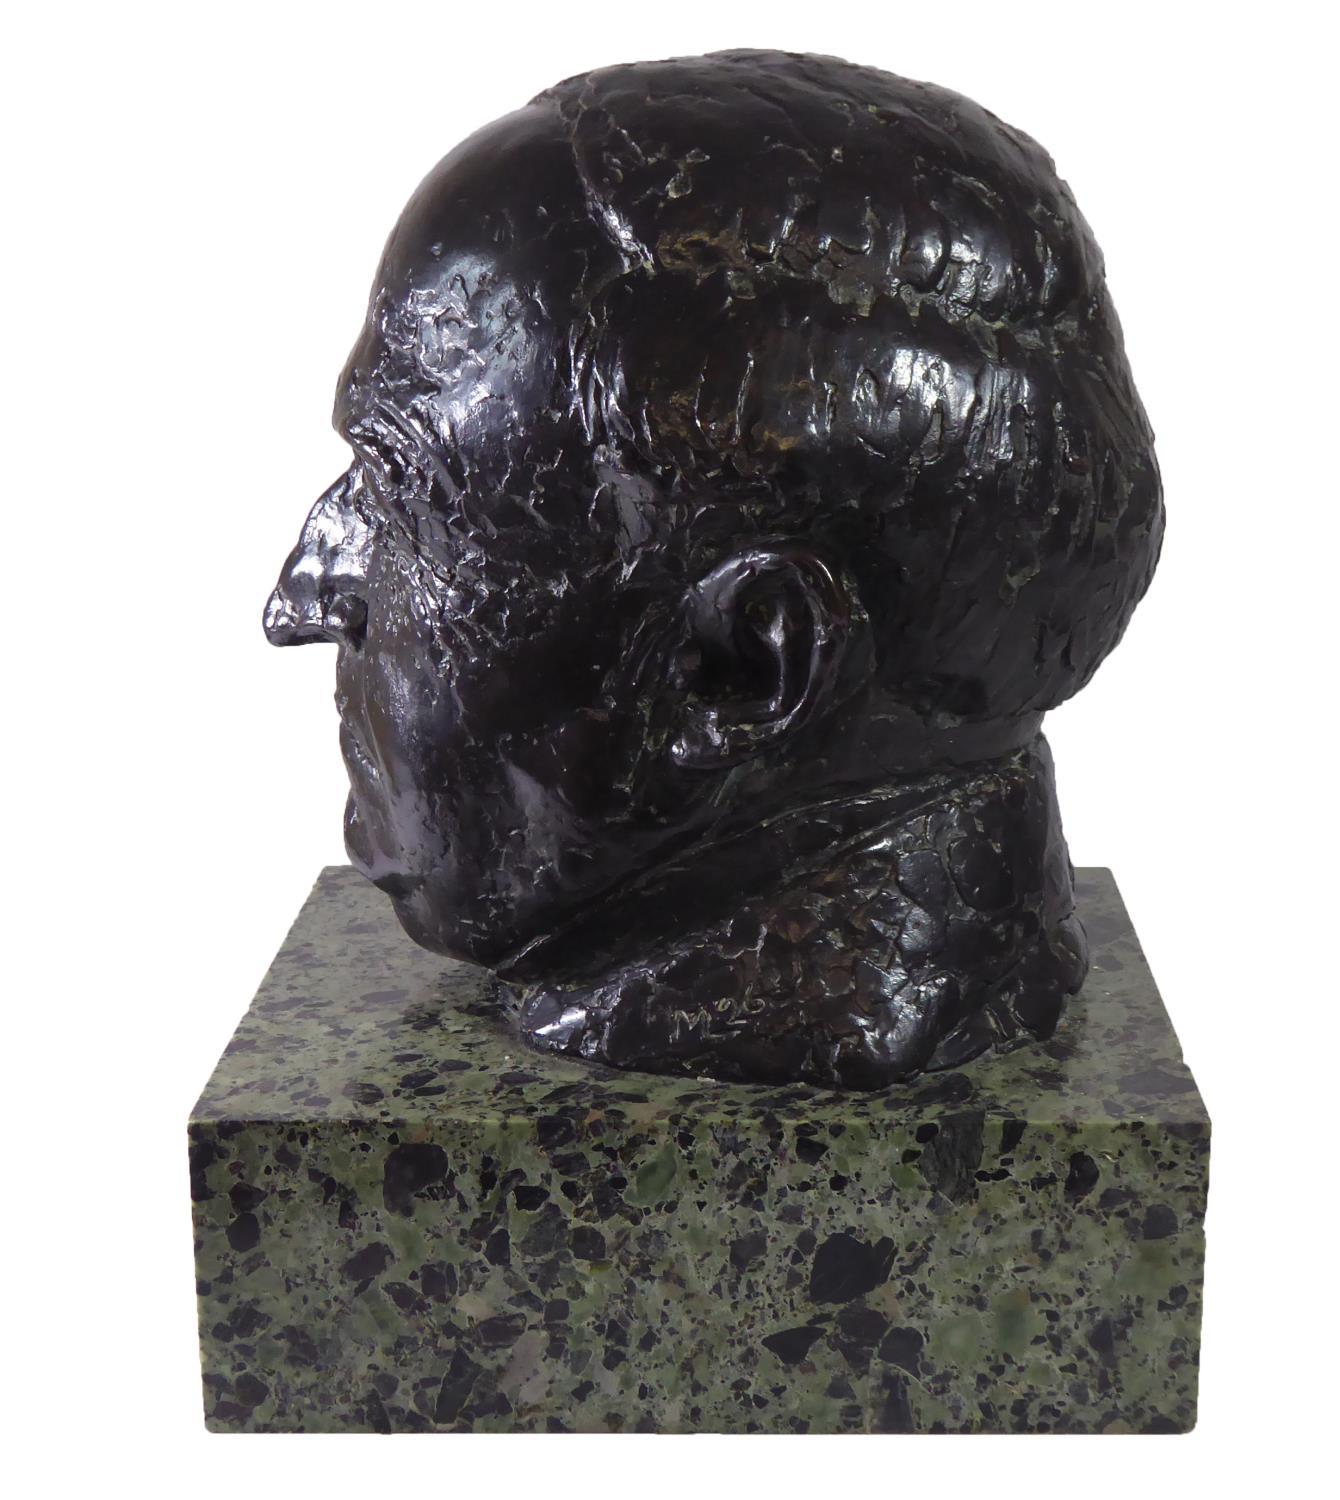 MAURICE LAMBERT, 1901 - 1964, BRONZE Titled 'Portrait Bust', signed with initials, on green marble - Image 2 of 3